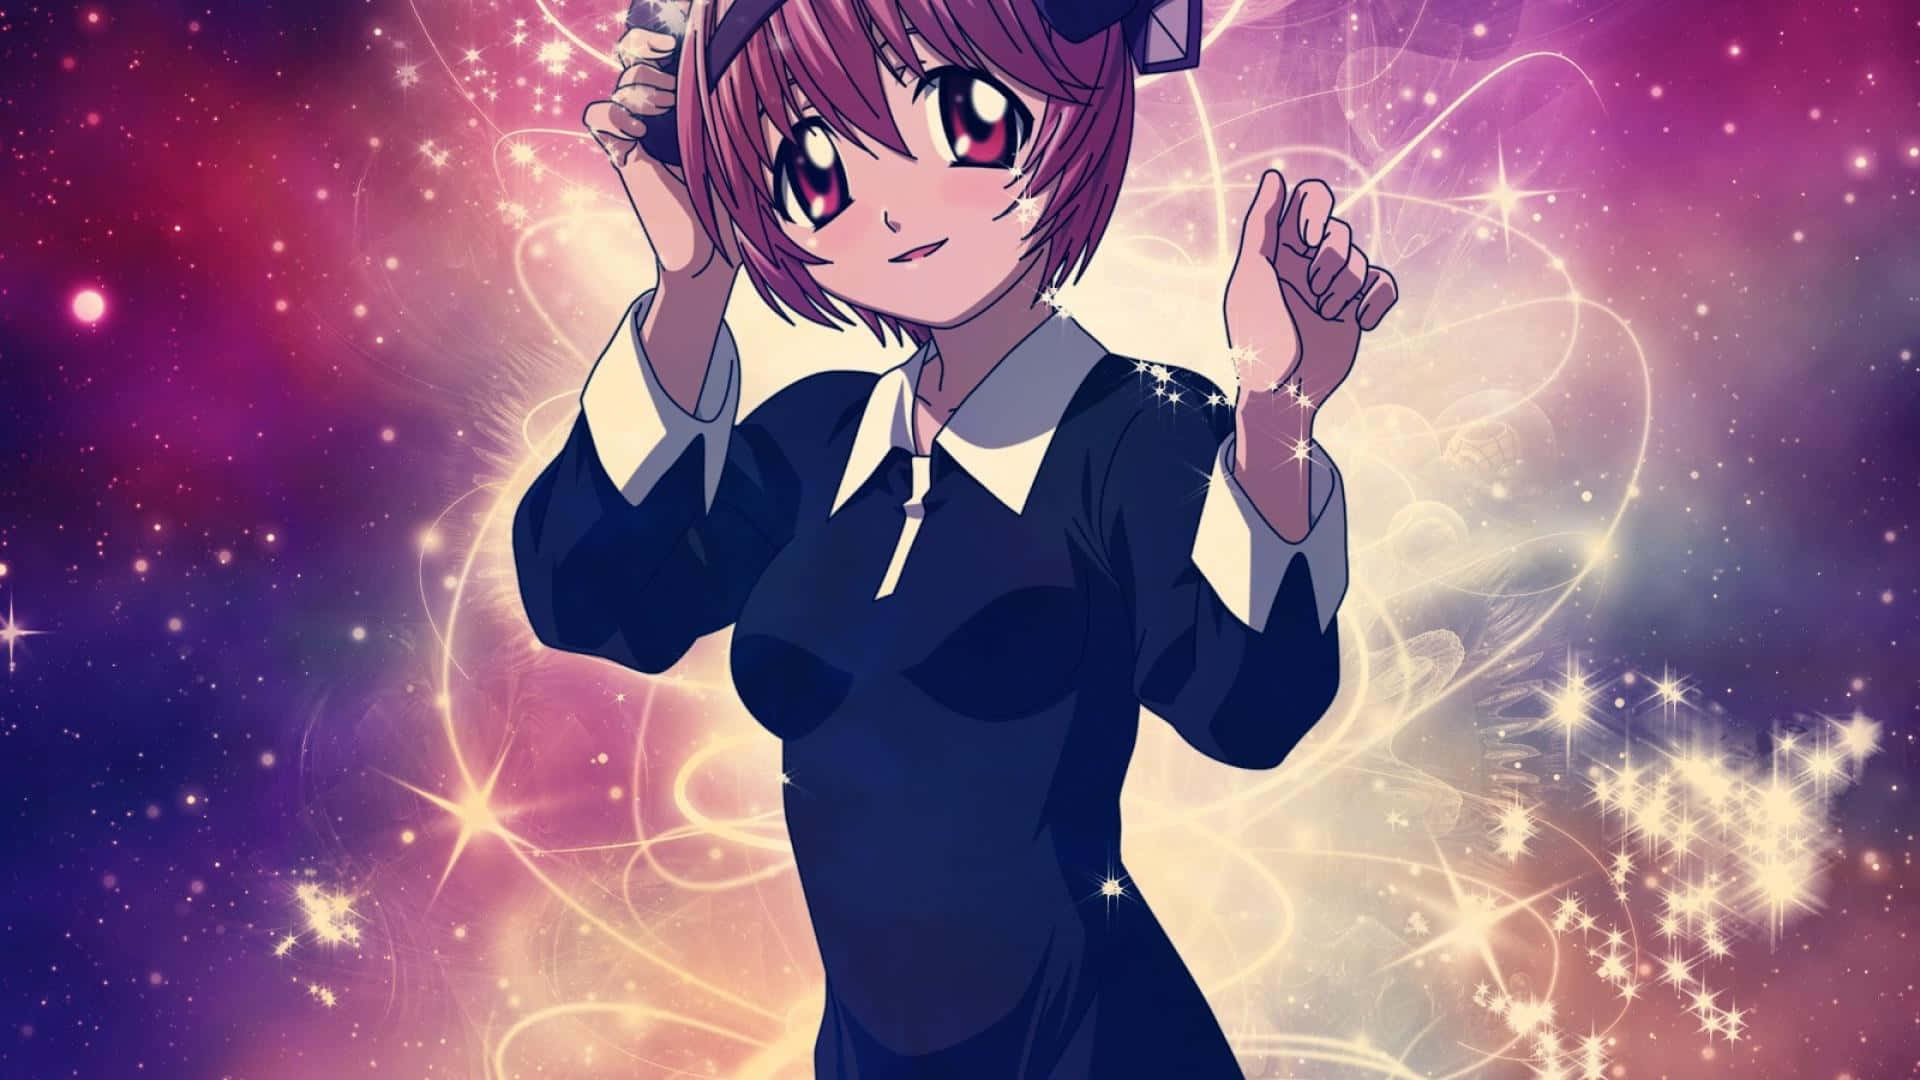 Lucy, the Diclonius from Elfen Lied